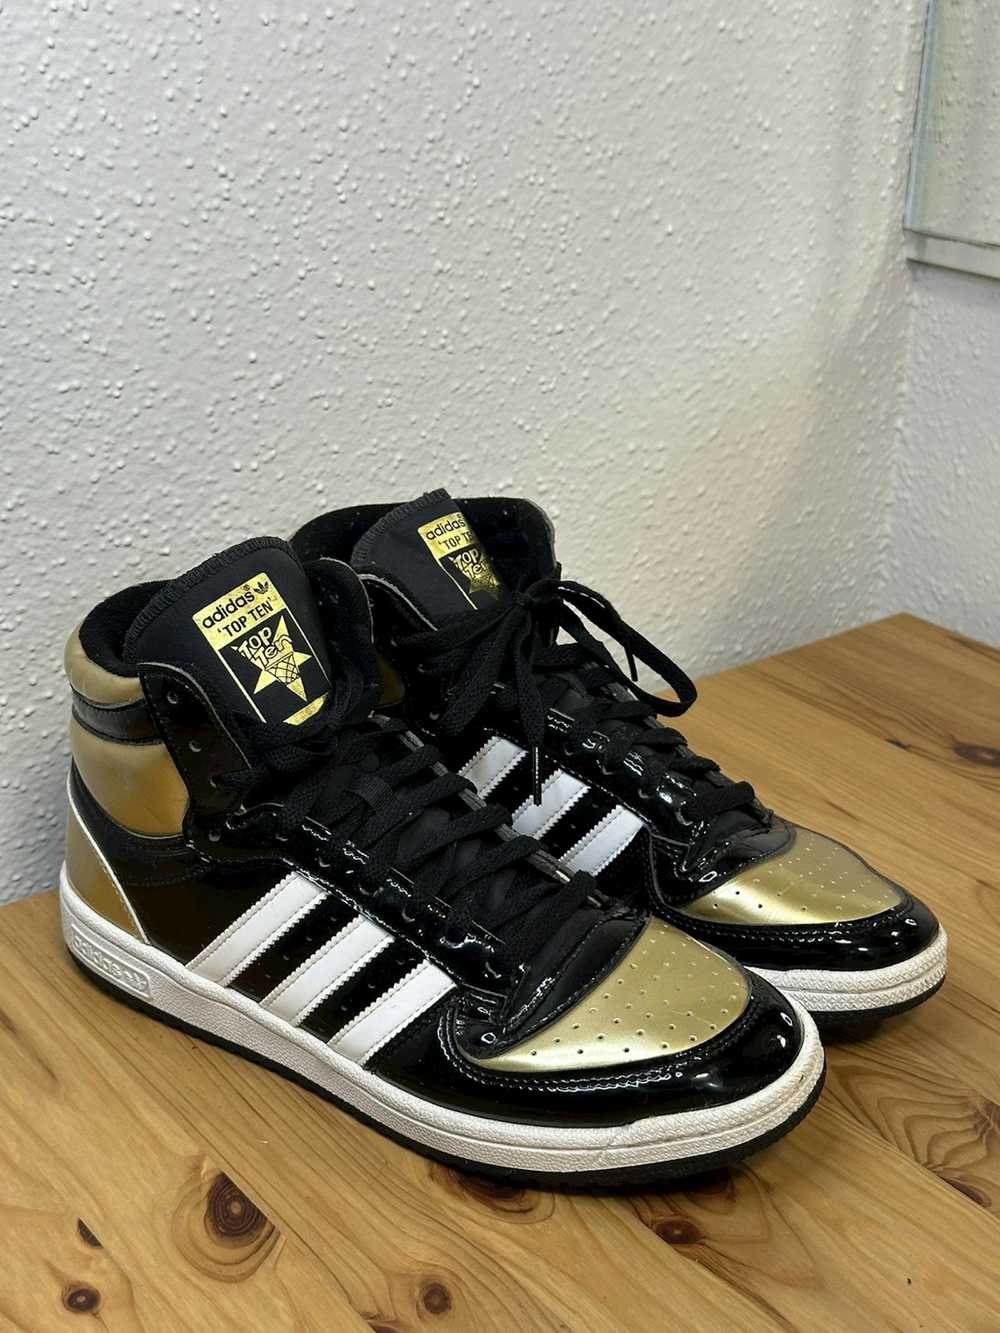 Adidas Top Ten RB Black Gold Patent size 9 - image 1